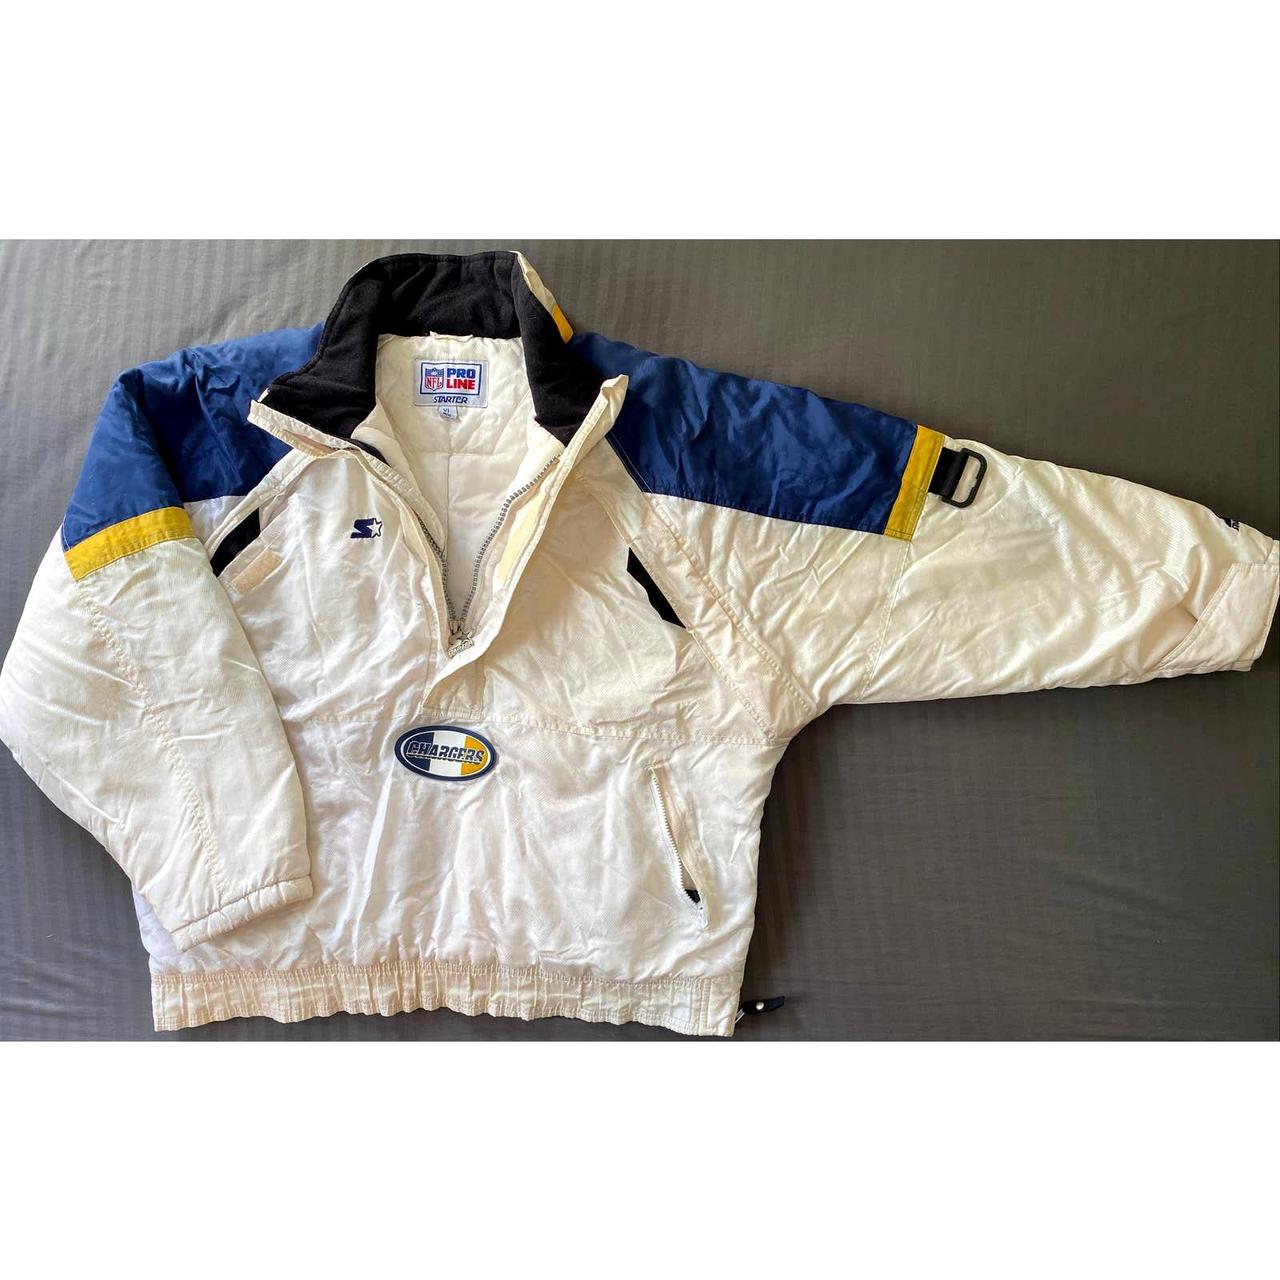 GENUINE LEATHER ST. LOUIS RAMS COAT SMALL BUT FITS - Depop